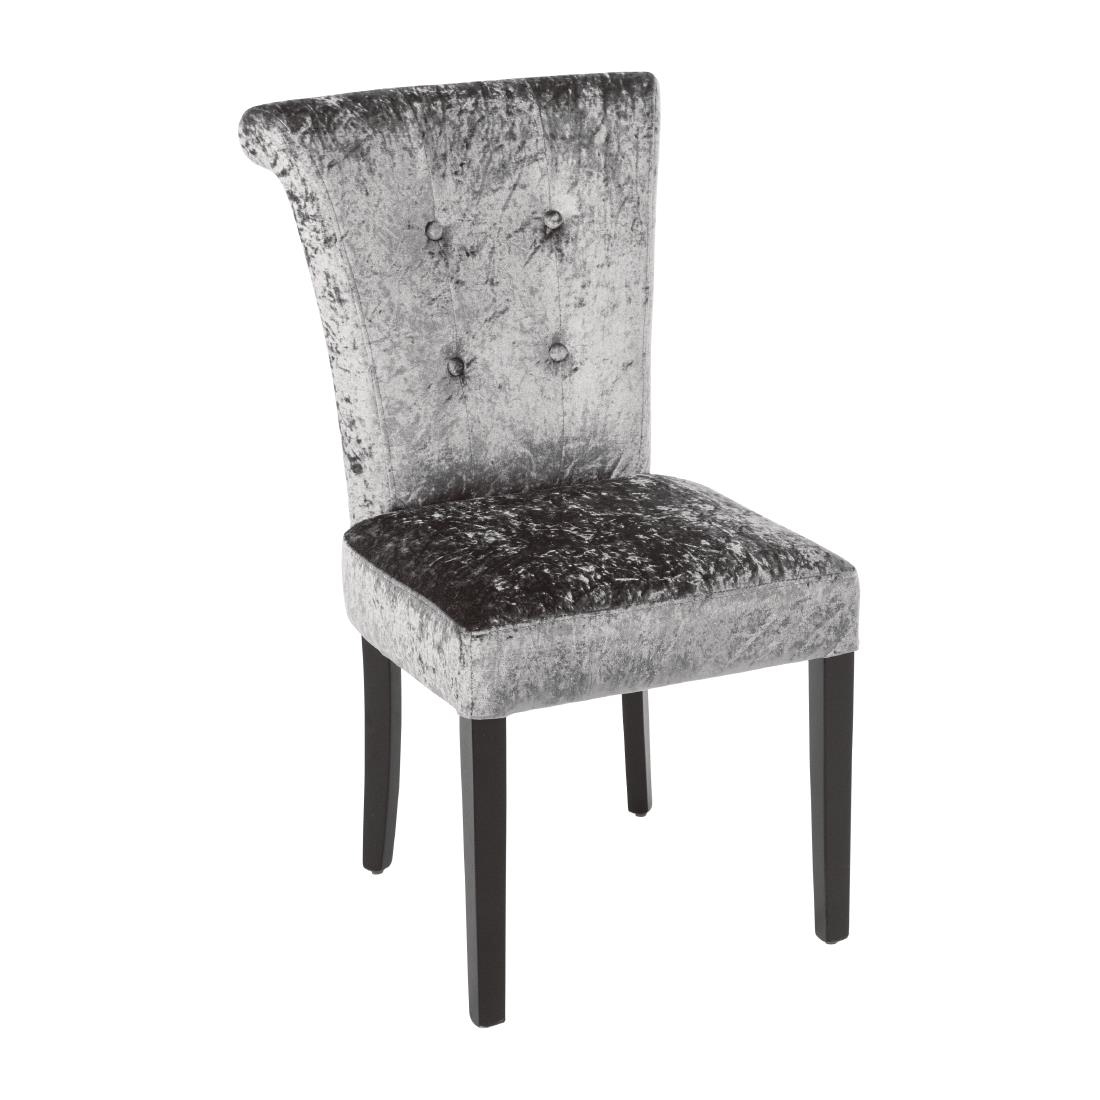 Crushed Velvet Dining Chair - Olive Grey